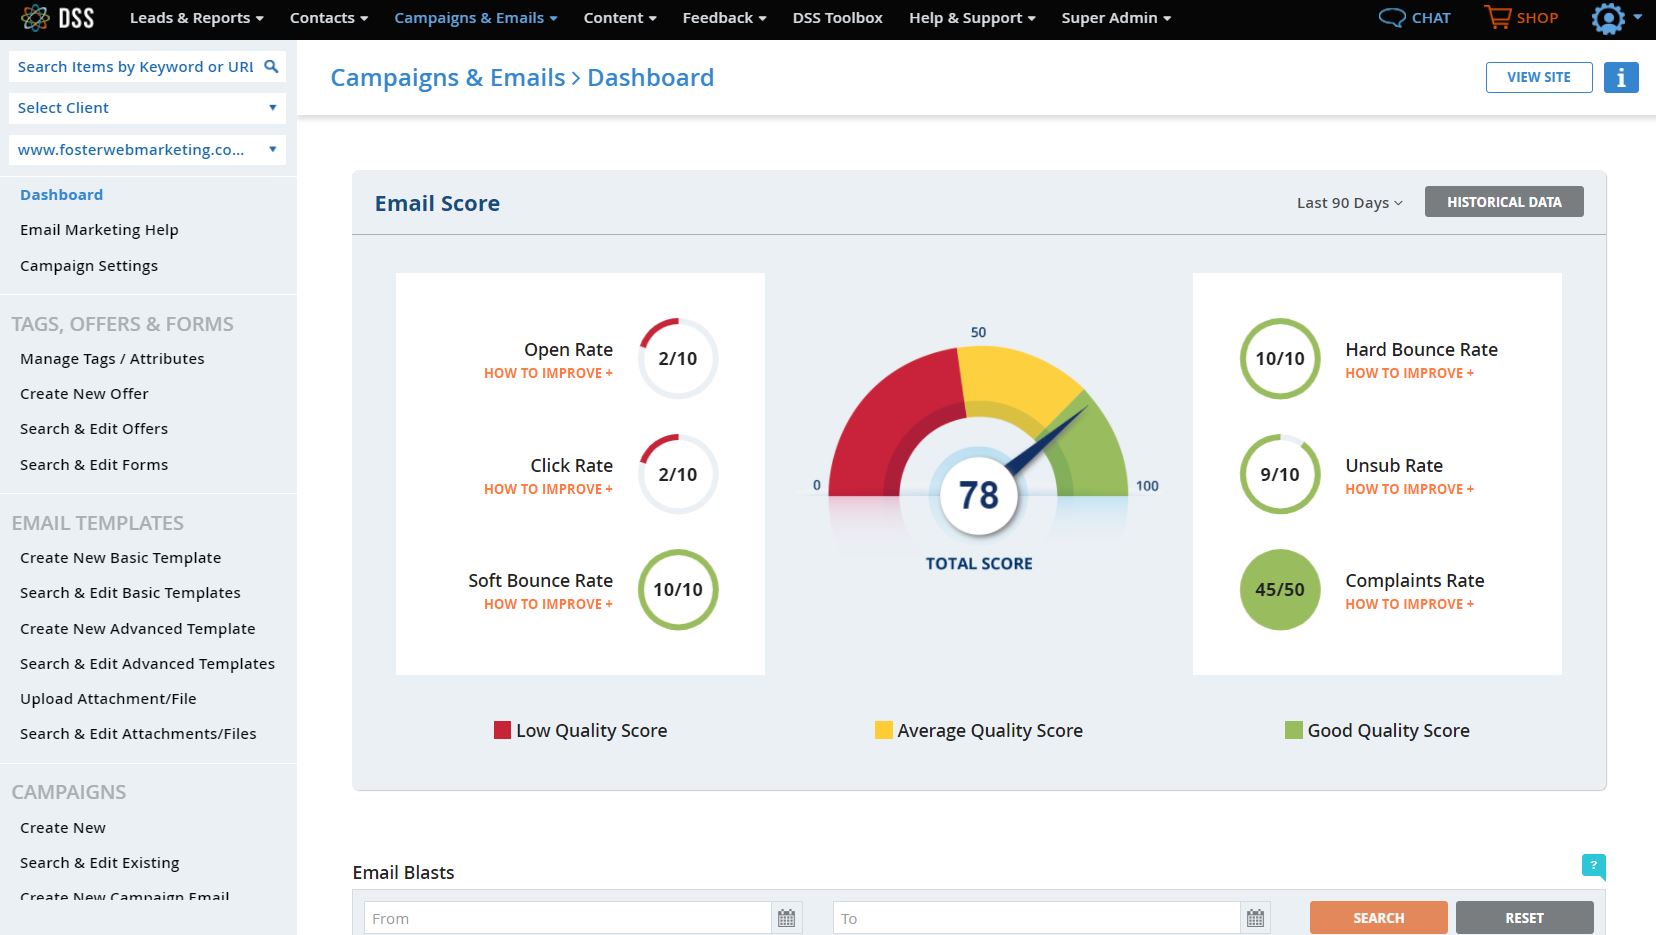 CRM Email Score Dashboard